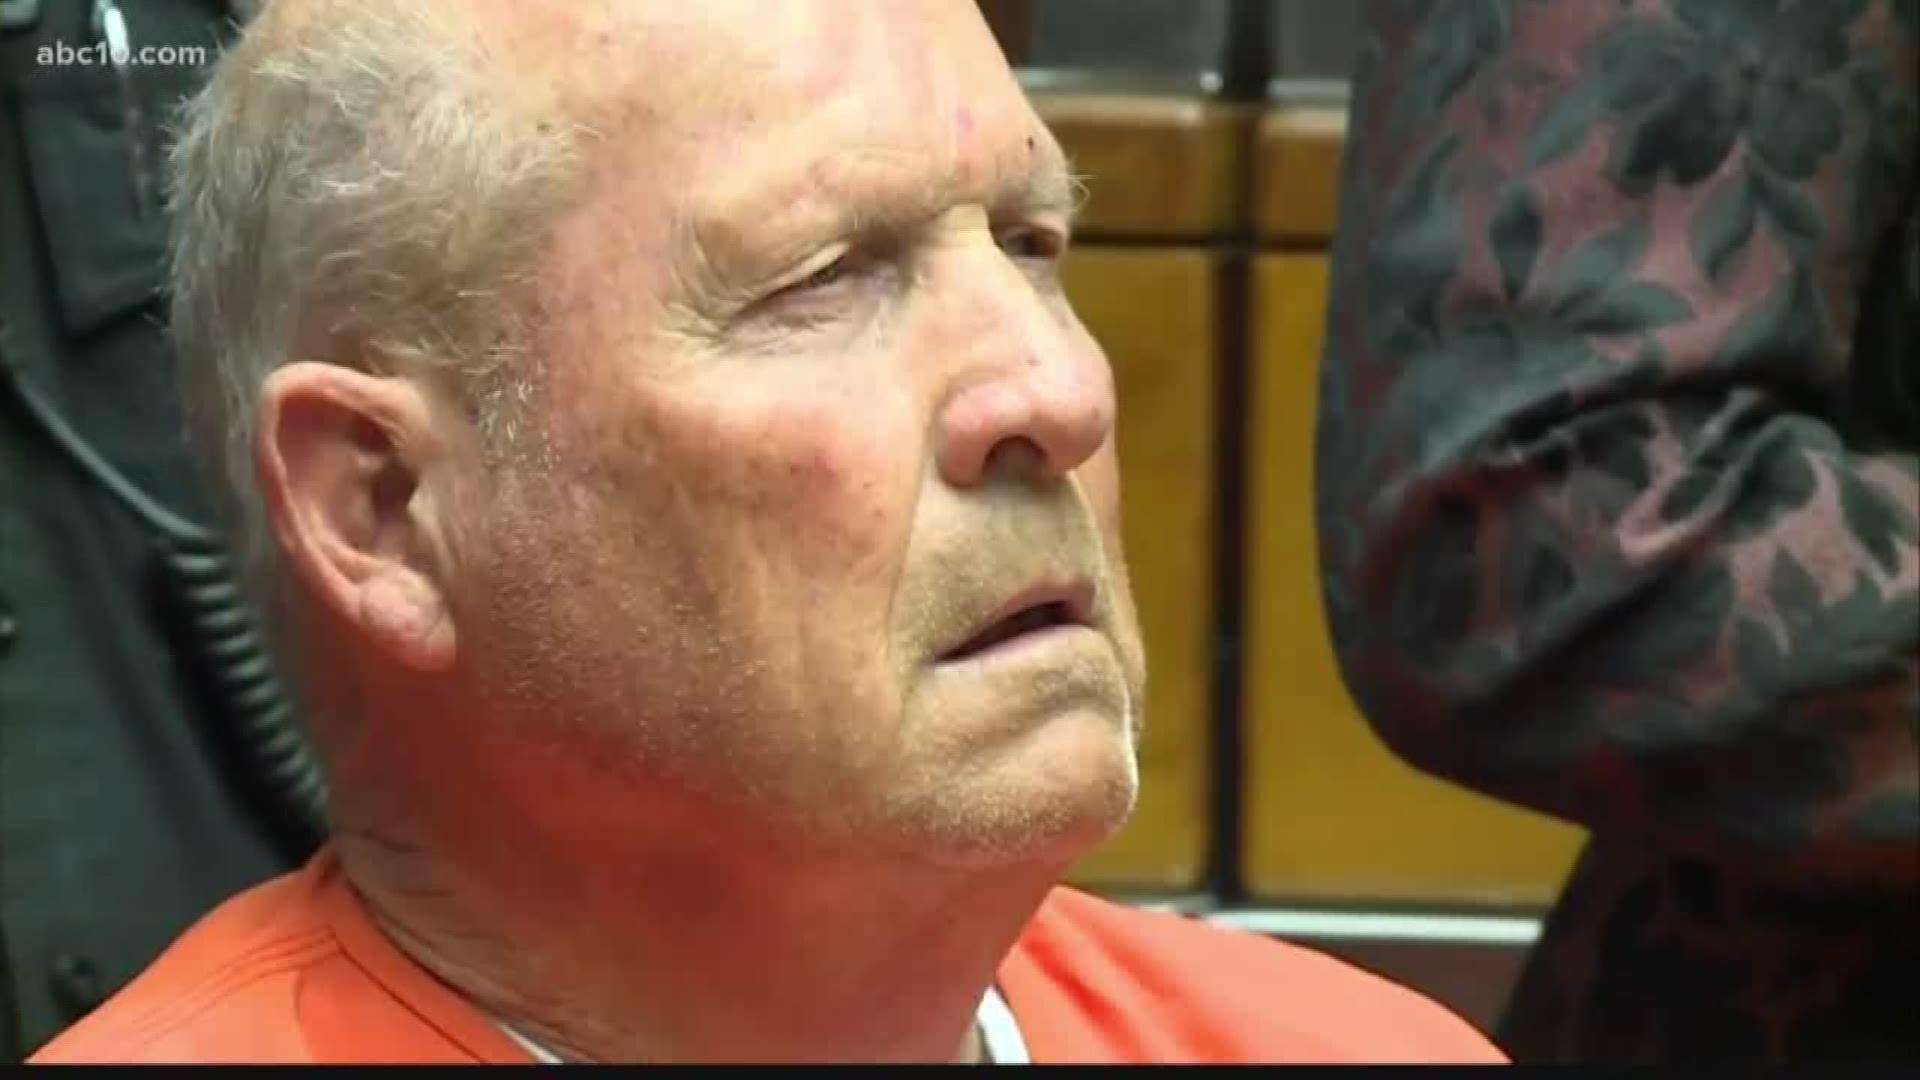 A 72-year-old former police officer accused of being one of California's most elusive serial killers appeared in a courtroom cage used for defendants in jail Monday as a judge put off a decision on whether to release search and arrest warrants in the case